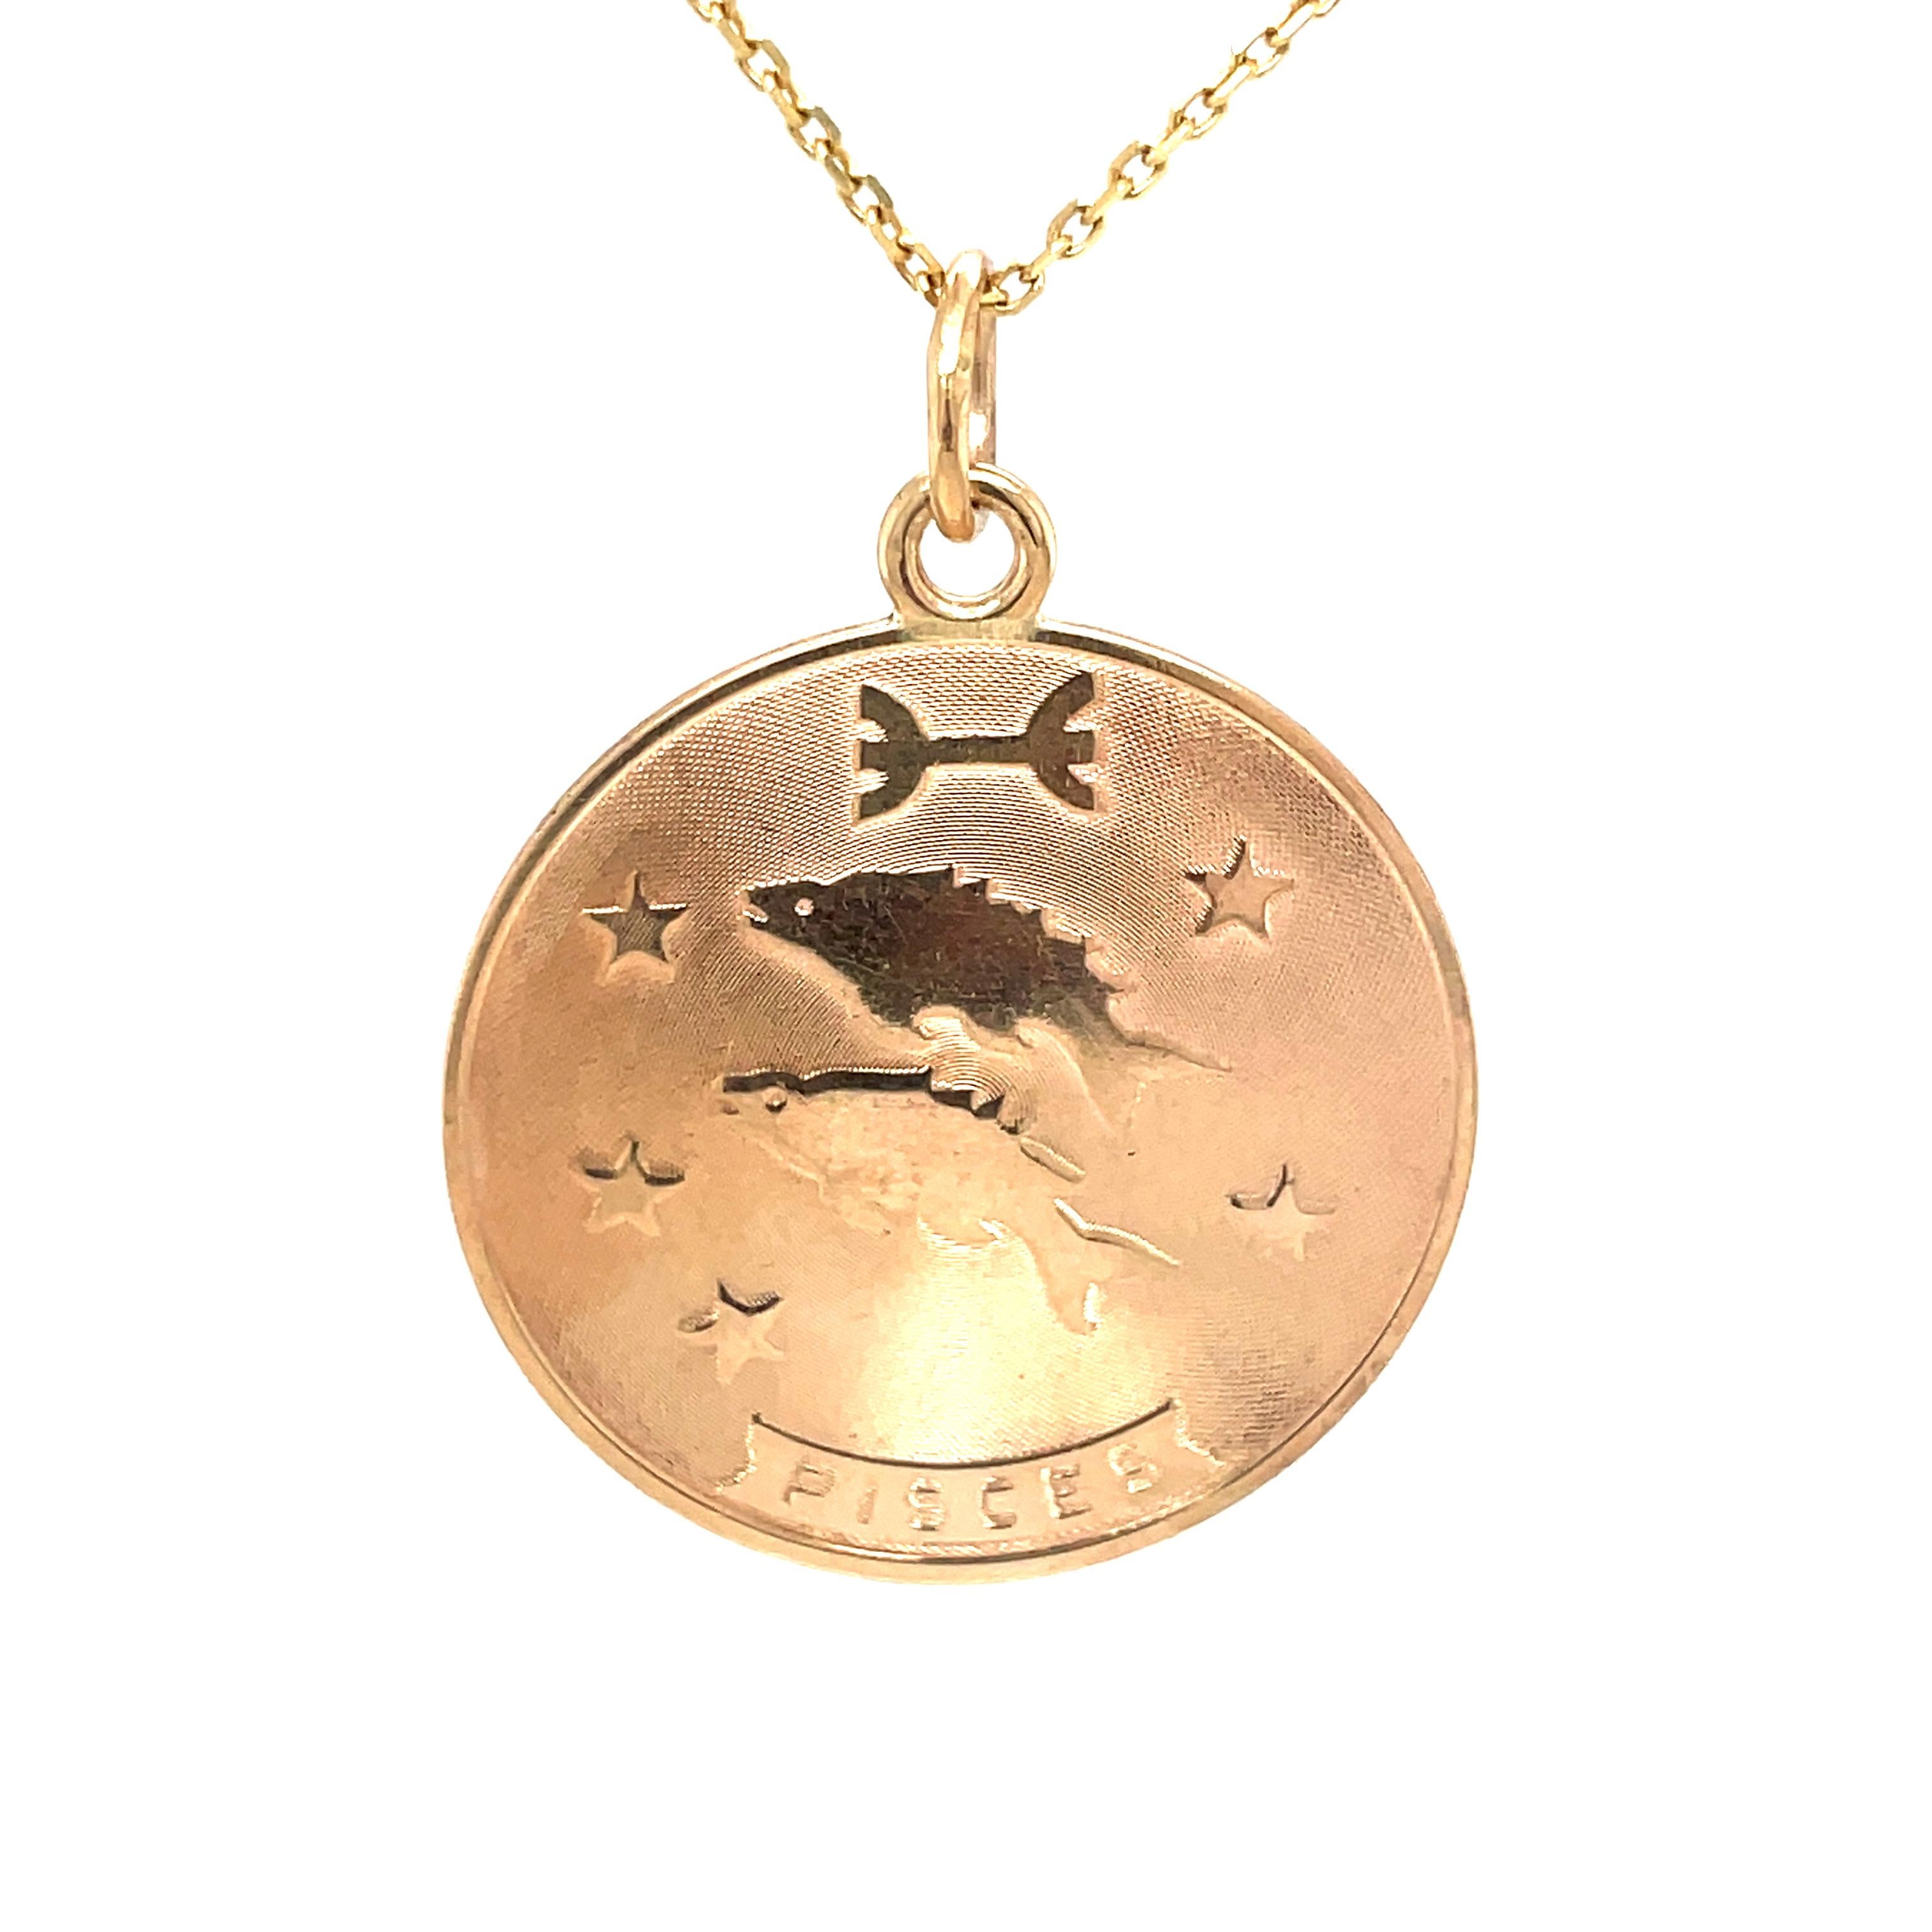 A very appealing Pisces charm/pendant.  Made and signed by TIFFANY & CO.  Two applied figural fish, the word Pisces and the zodiac sign are all in shiny 14K yellow gold, set on a textured background.  Very attractive configuration.  1